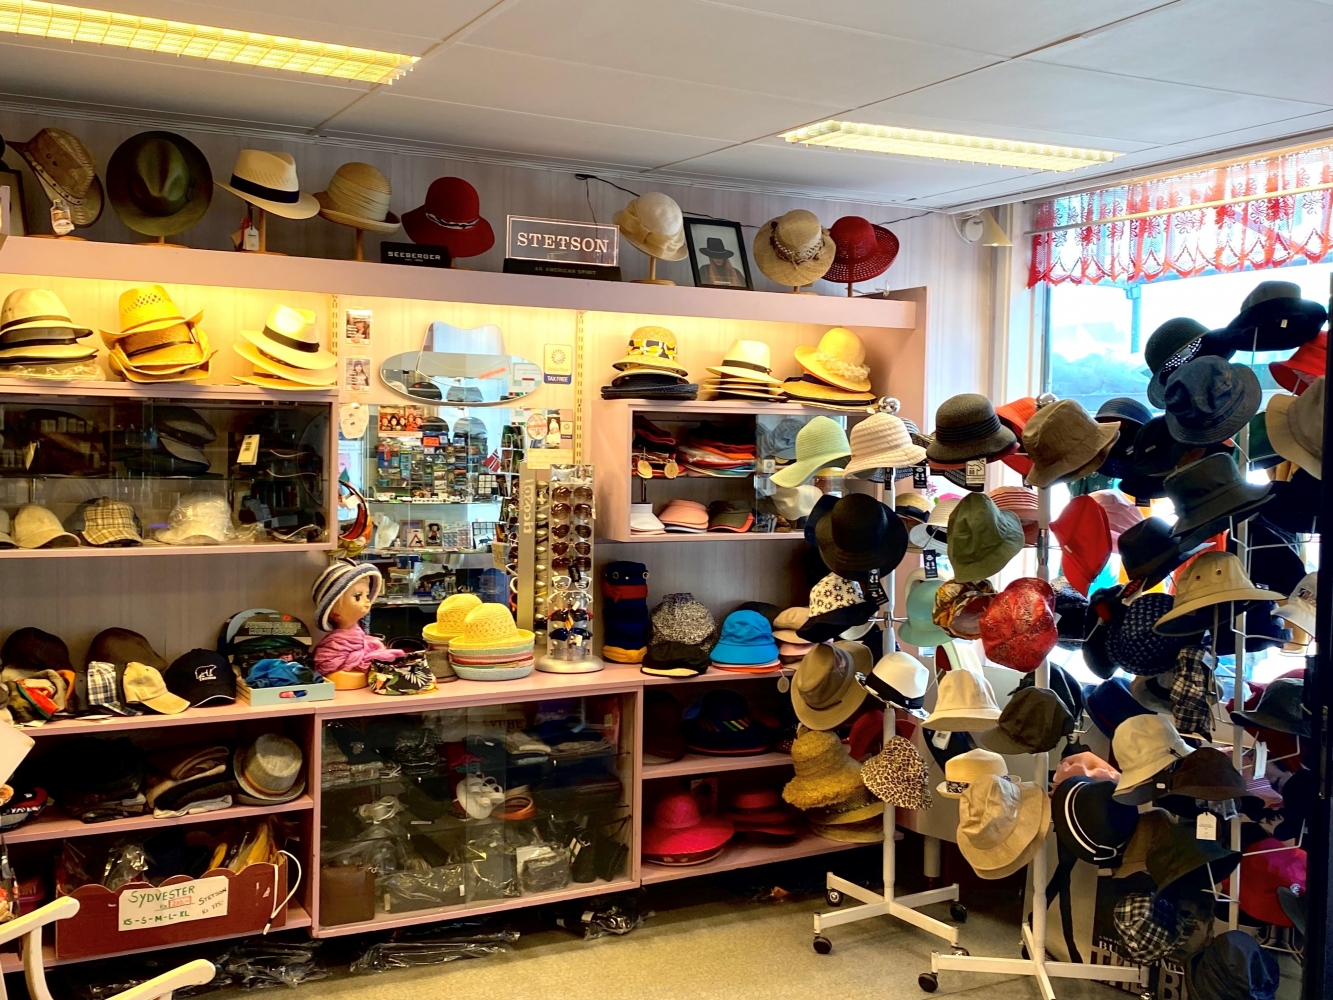 The hat collection in the store